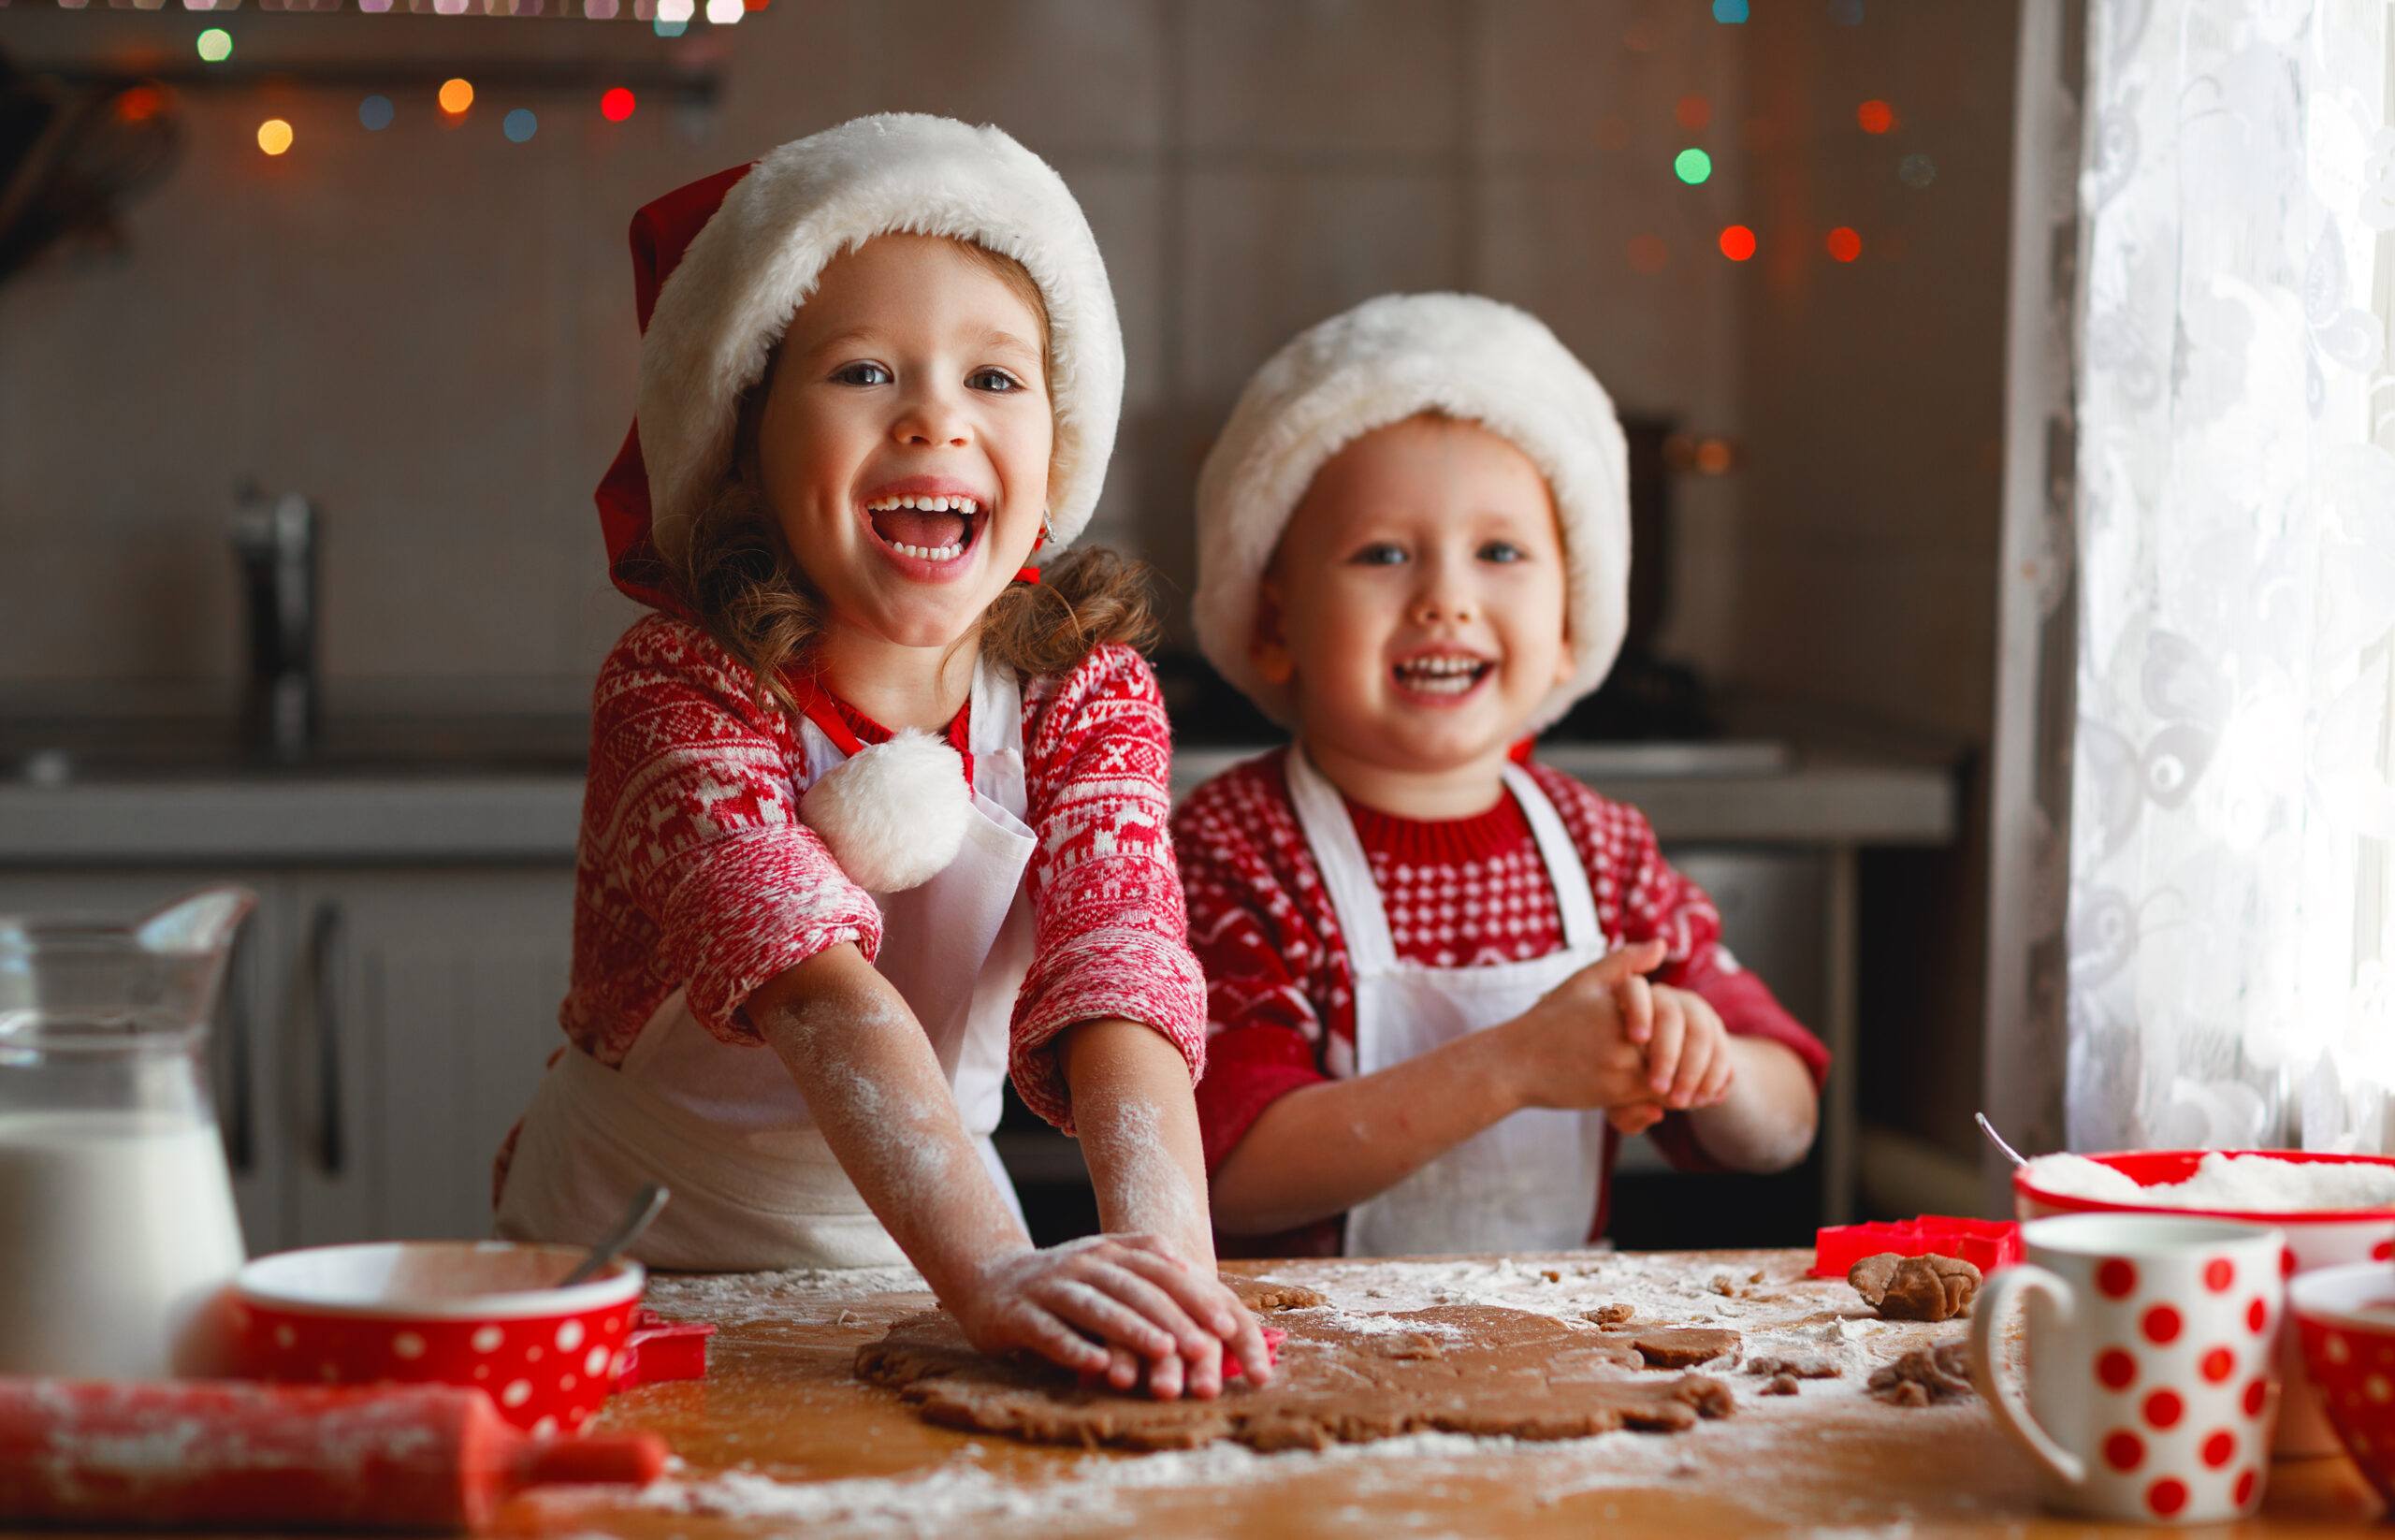 EATS' Top 10 Gift Ideas for Little Chefs